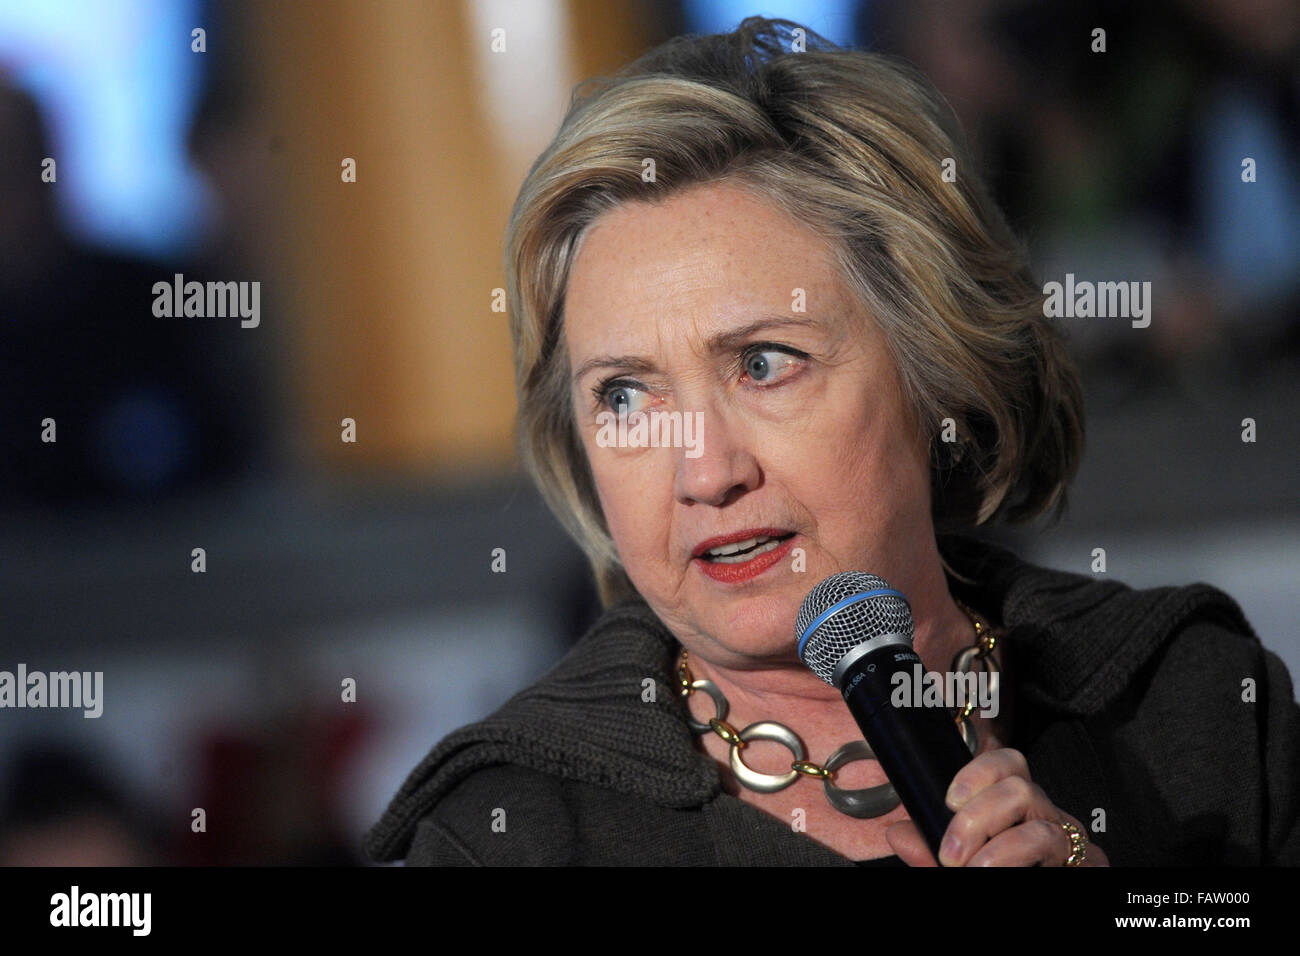 Keene, New Hampshire. 3rd Jan, 2016. Hillary Clinton, former Secretary of State and 2016 Democratic presidential candidate, speaks during a town hall meeting at Keene High School on January 3, 2016 in Keene, New Hampshire. © dpa/Alamy Live News Stock Photo